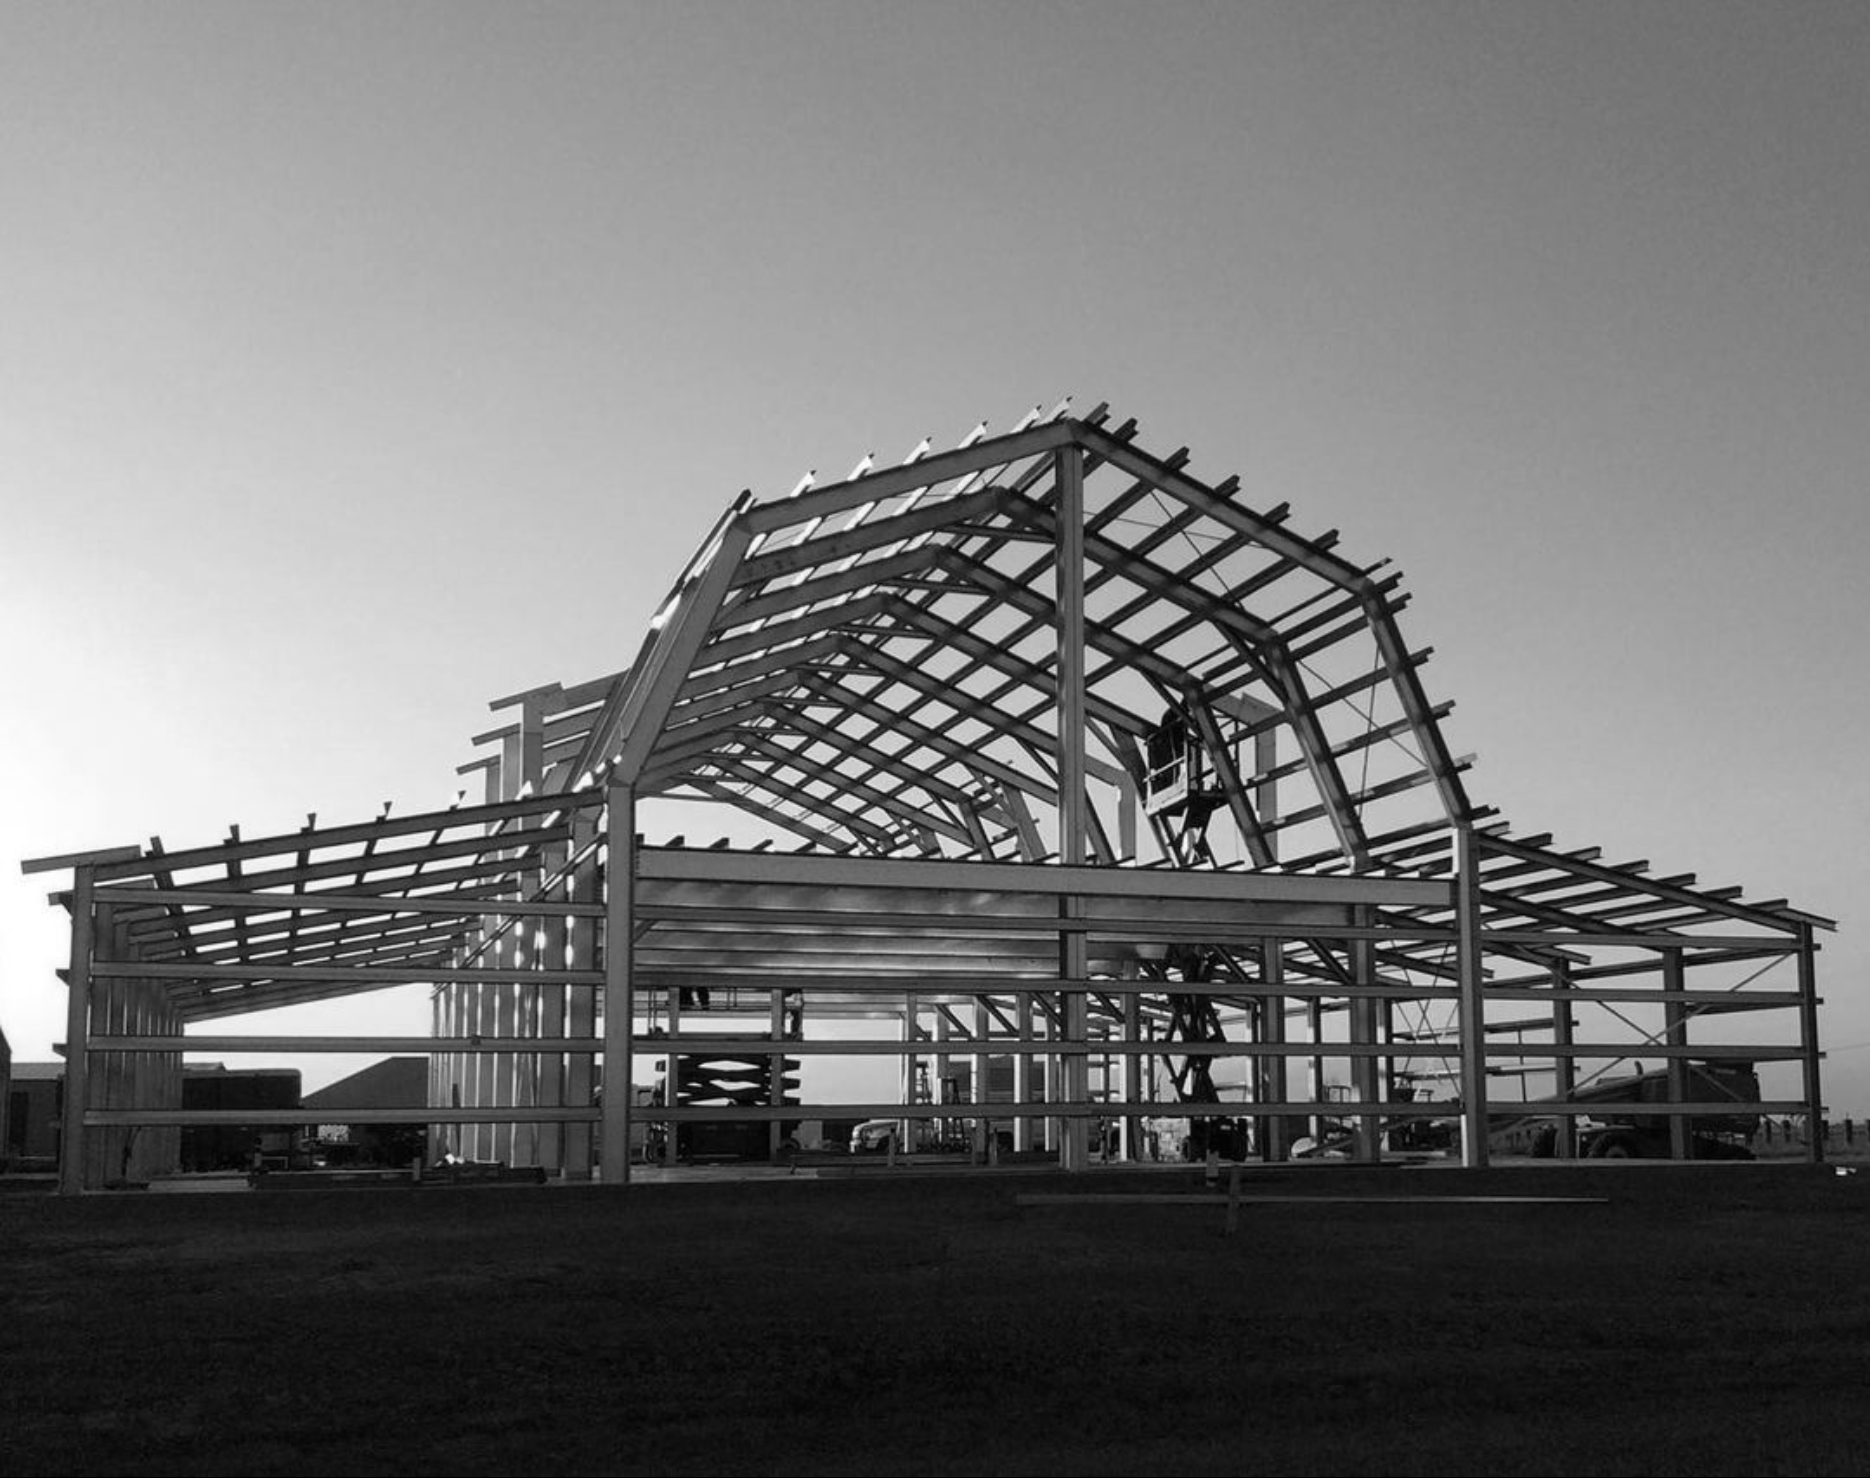 Cold-Formed Was First Used In Steel Framing